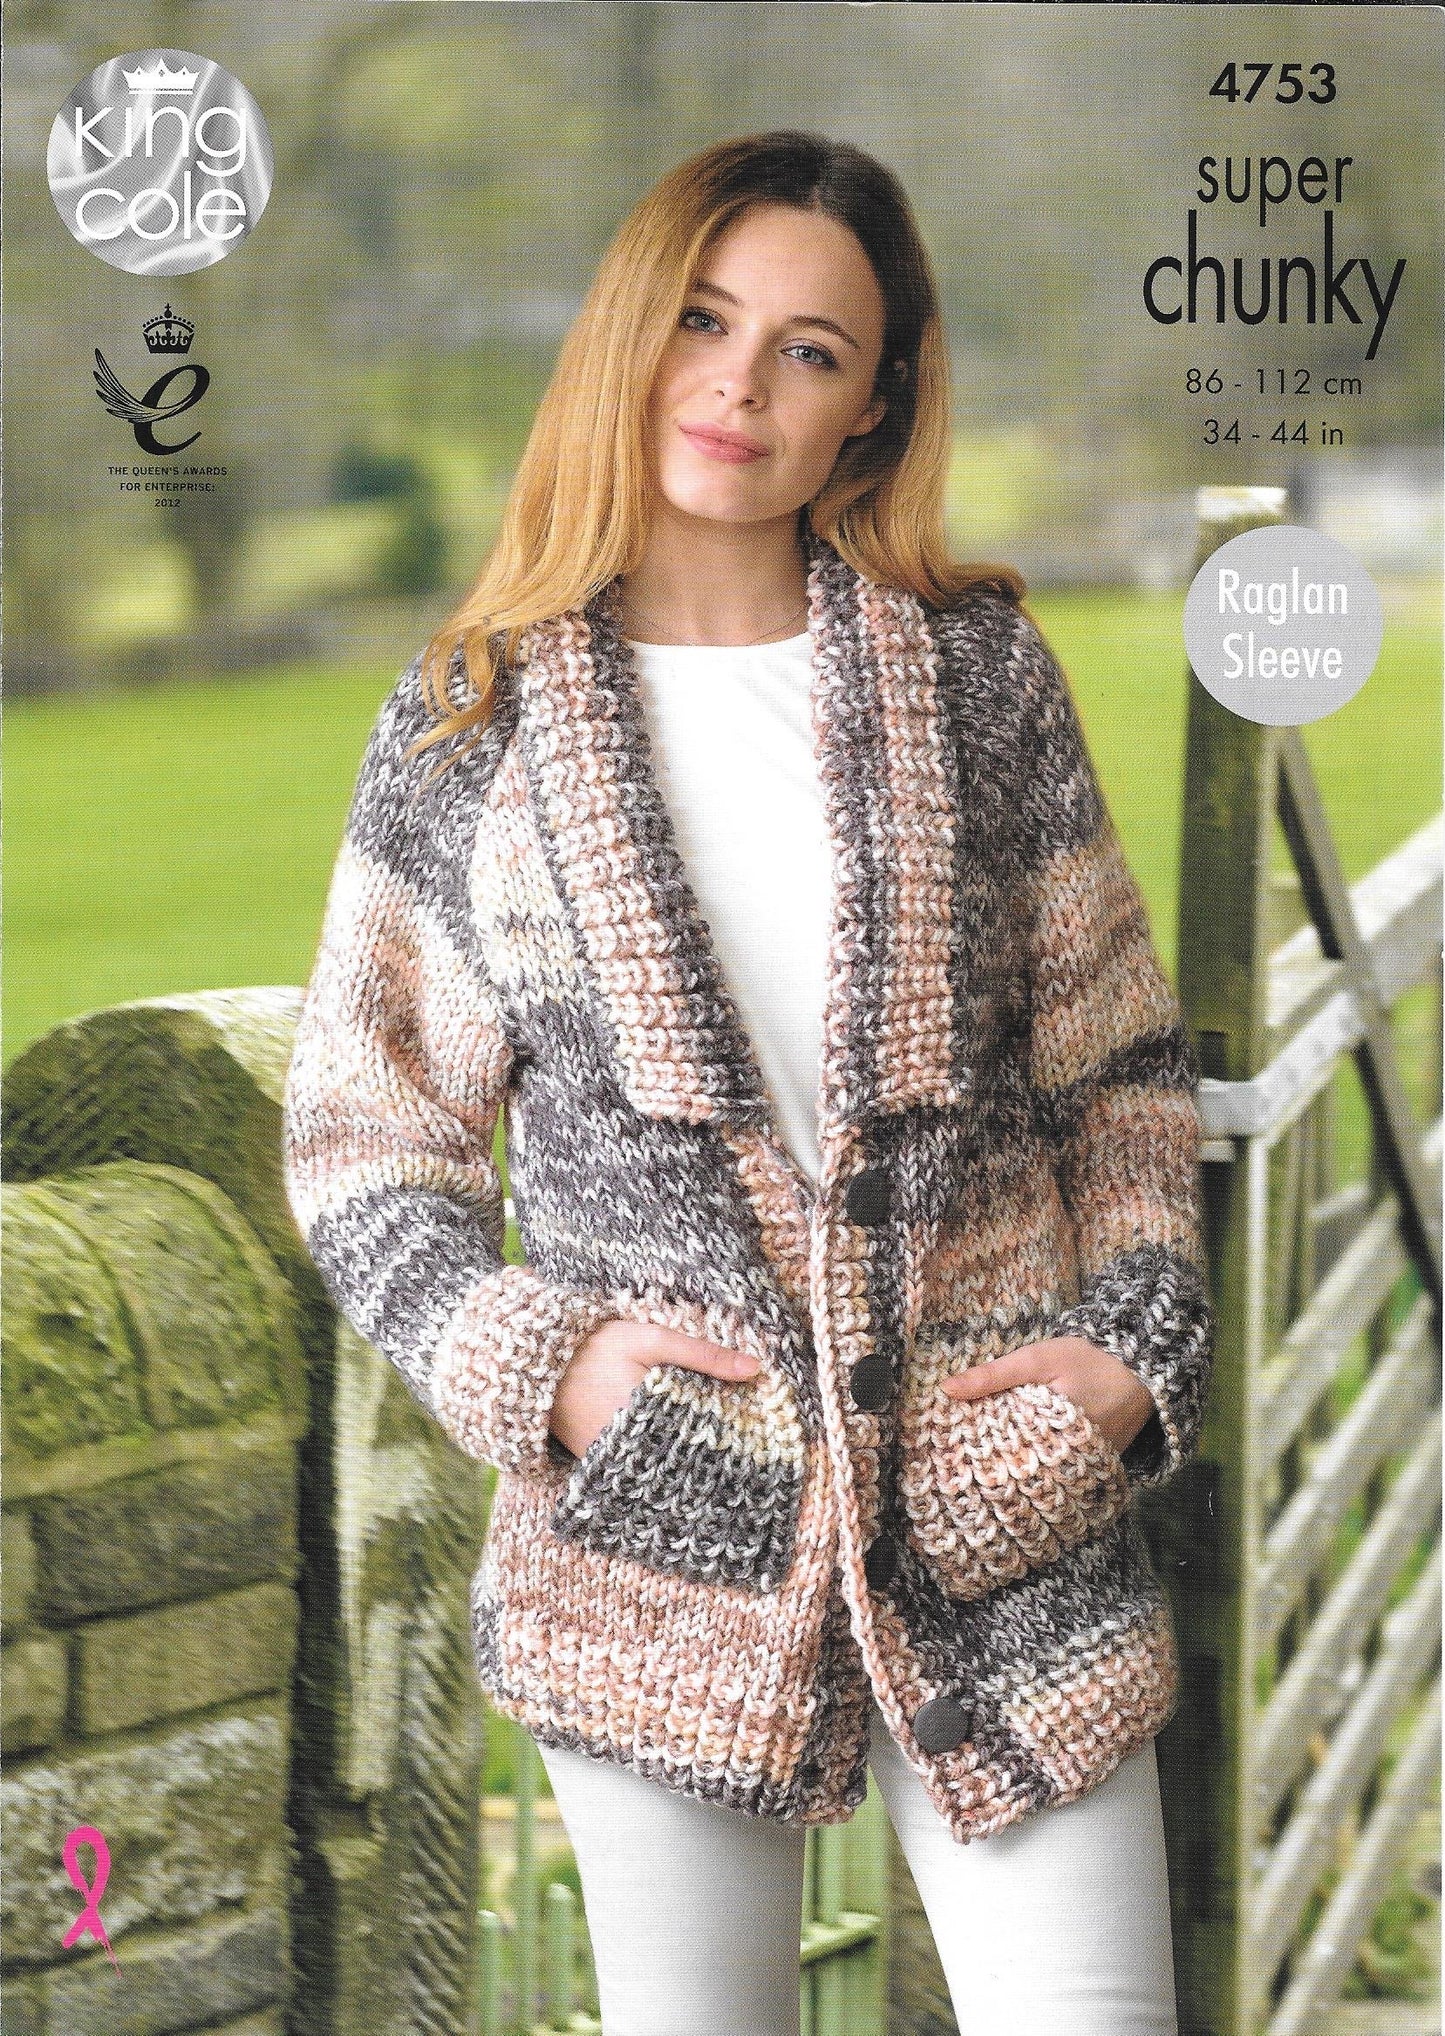 4753 King Cole Super Chunky ladies jacket and sweater knitting pattern